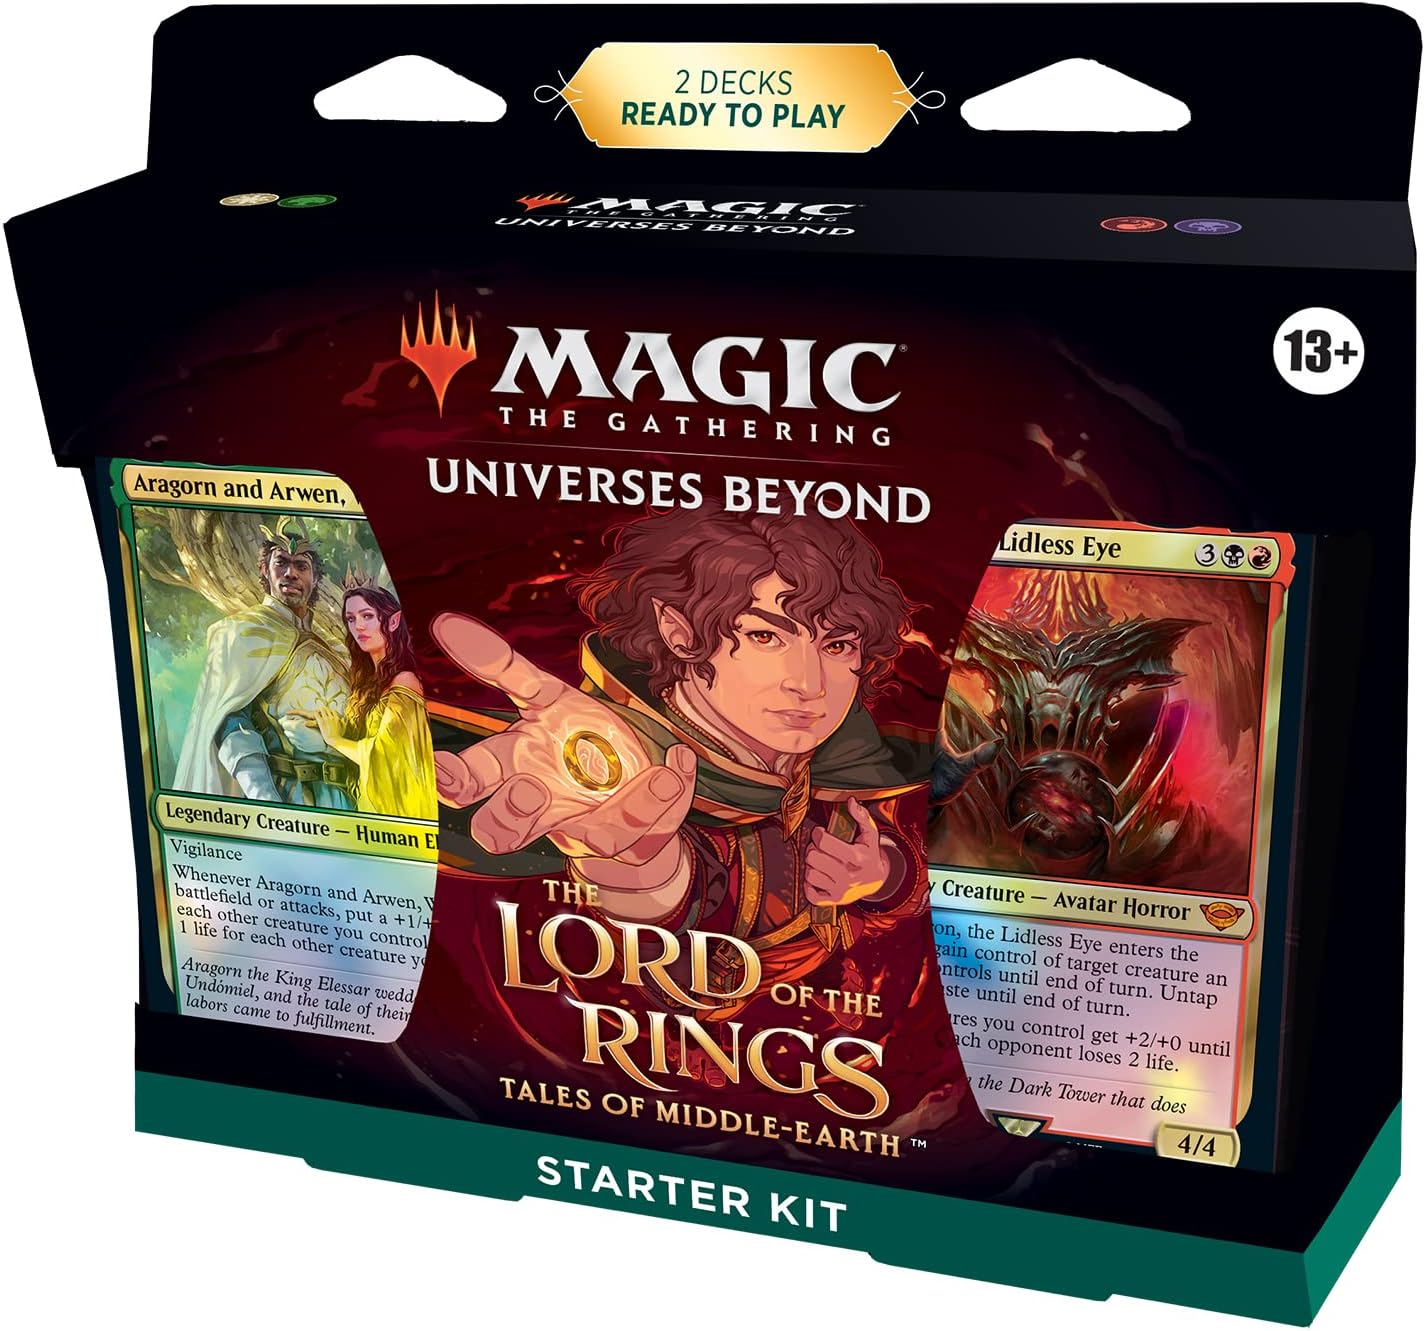 Magic The Gathering The Lord of The Rings: Tales of Middle-Earth Starter Kit - Learn to Play with 2 Ready-to-Play Decks + 2 Codes to Play Online (2-Player Card Game)